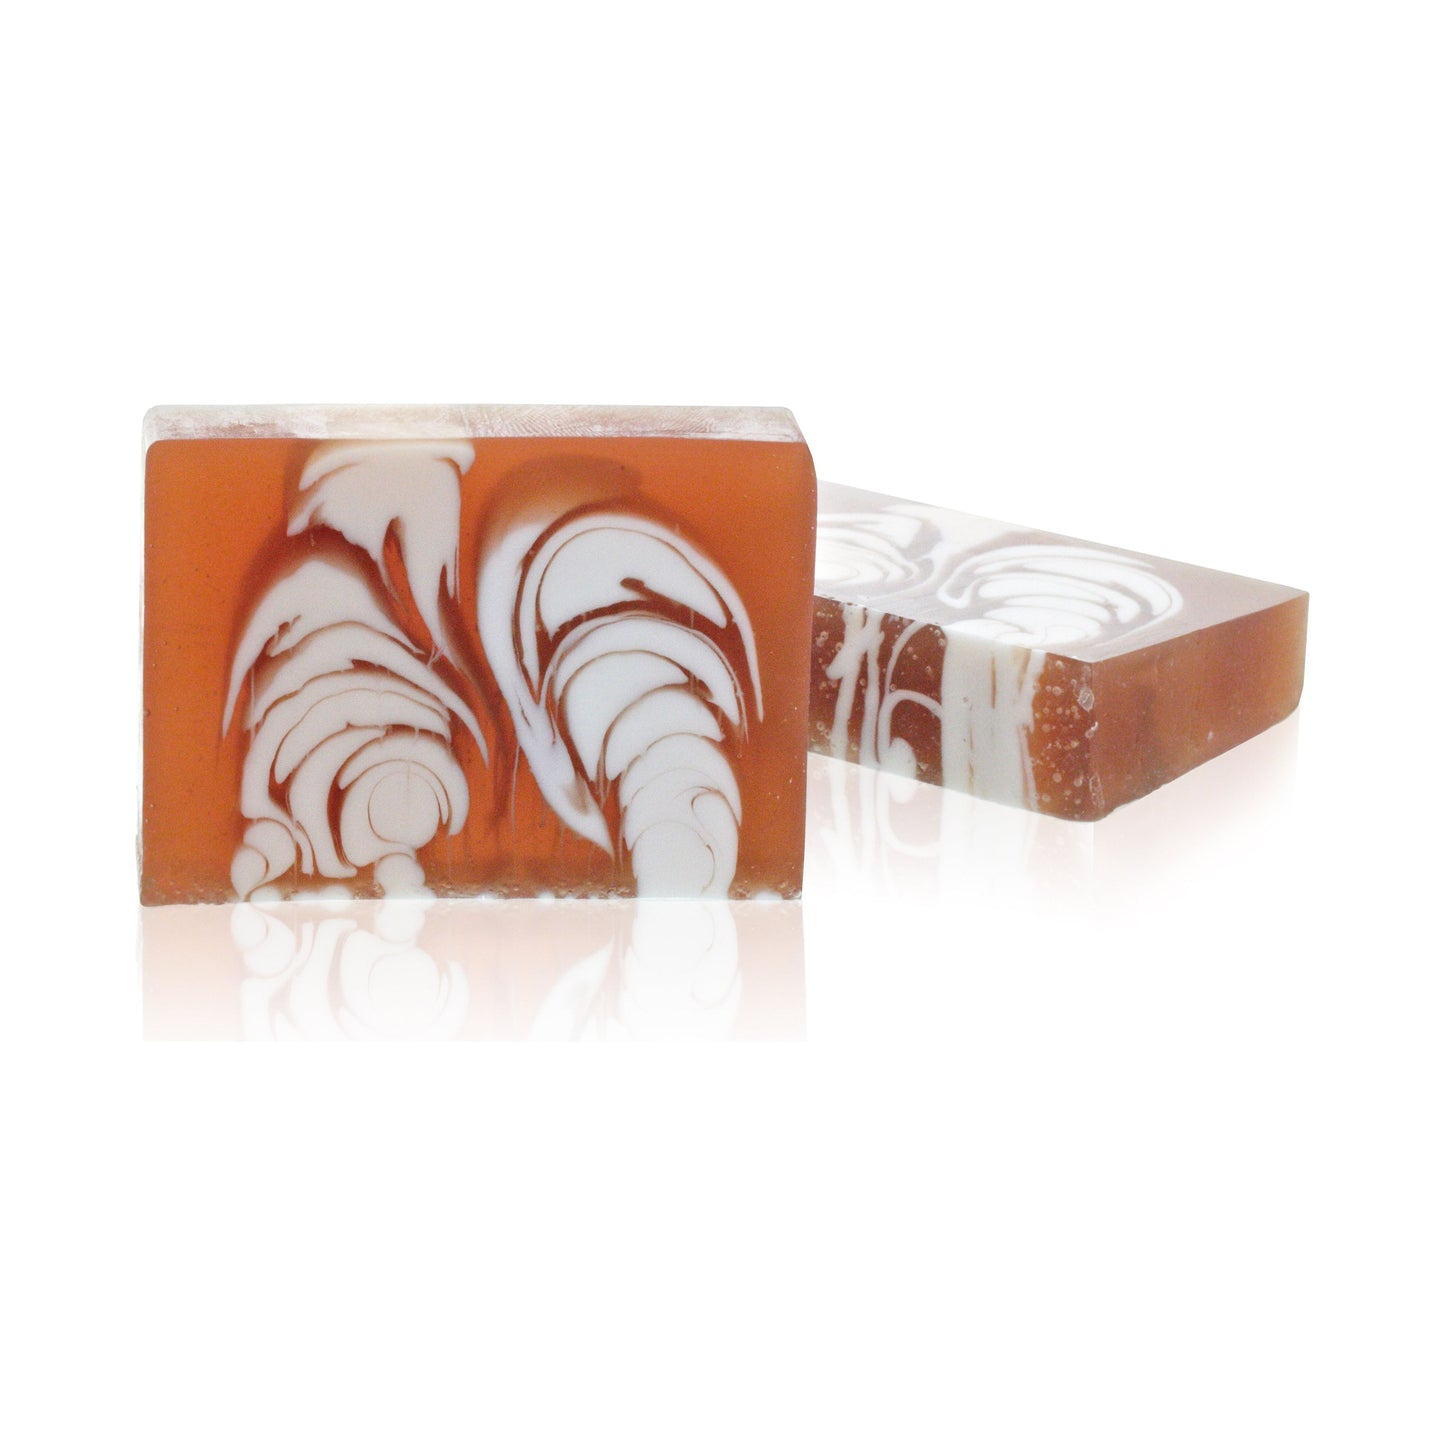 Handcrafted Soap Slice 100g - Almond - Ashton and Finch